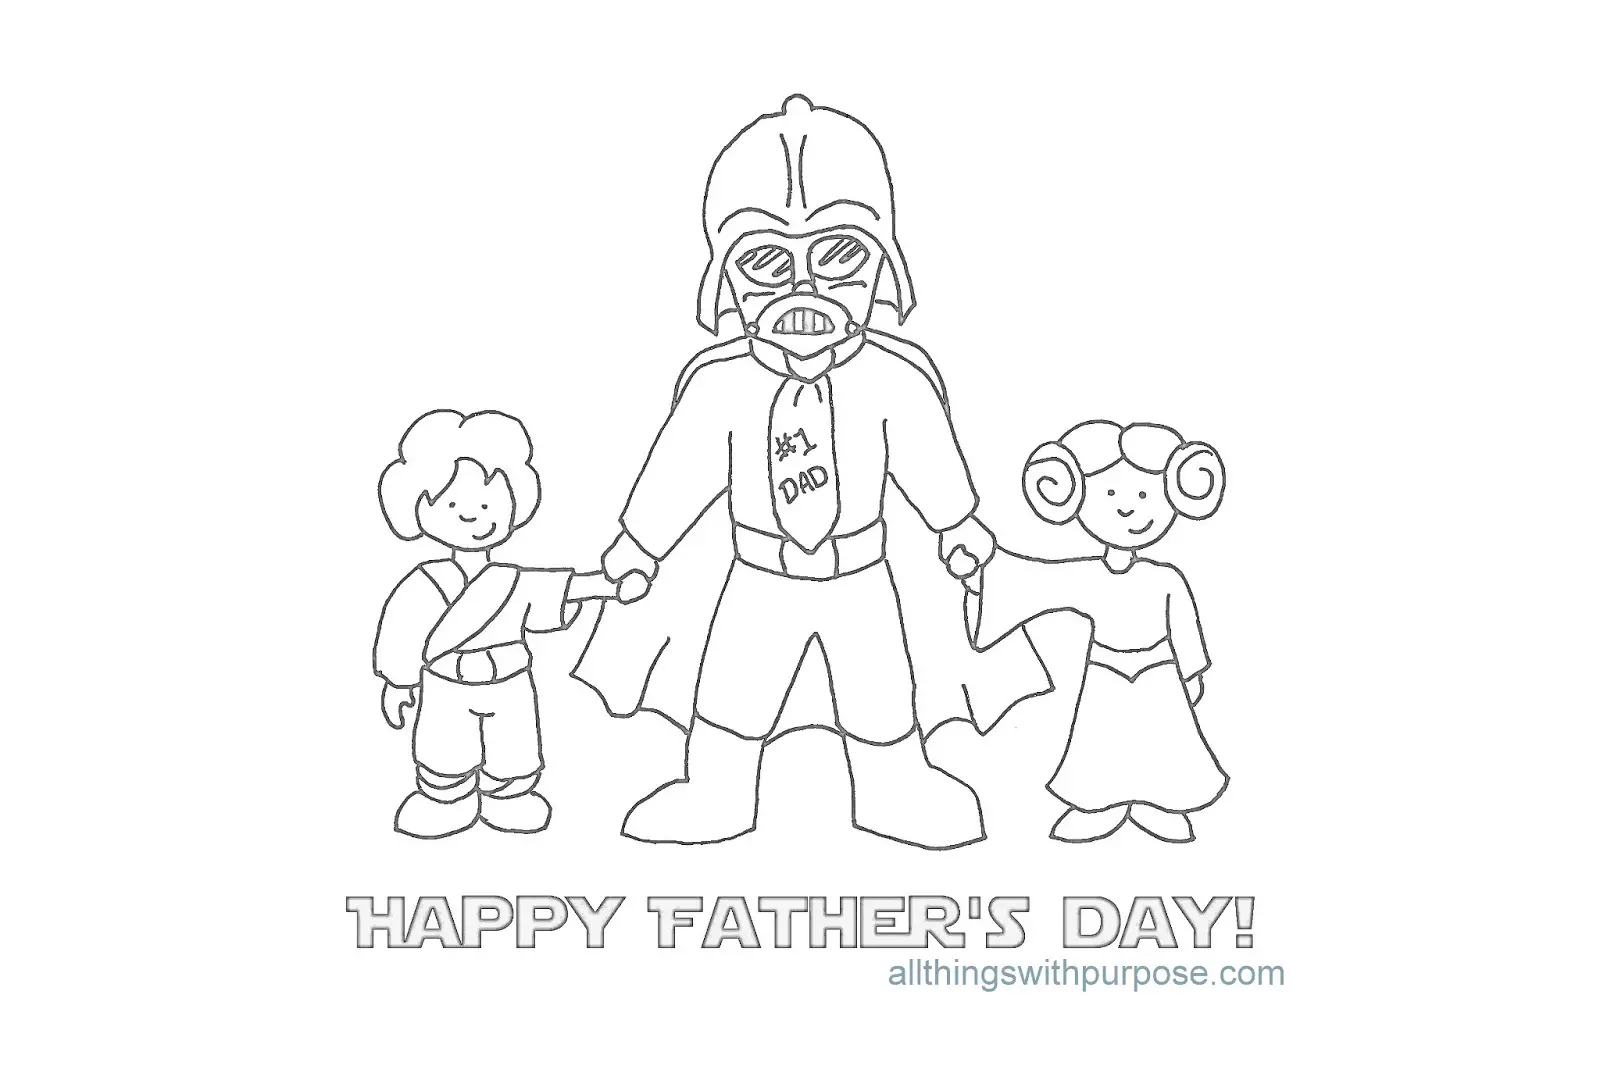 10-printable-father-s-day-cards-to-color-kitty-baby-love